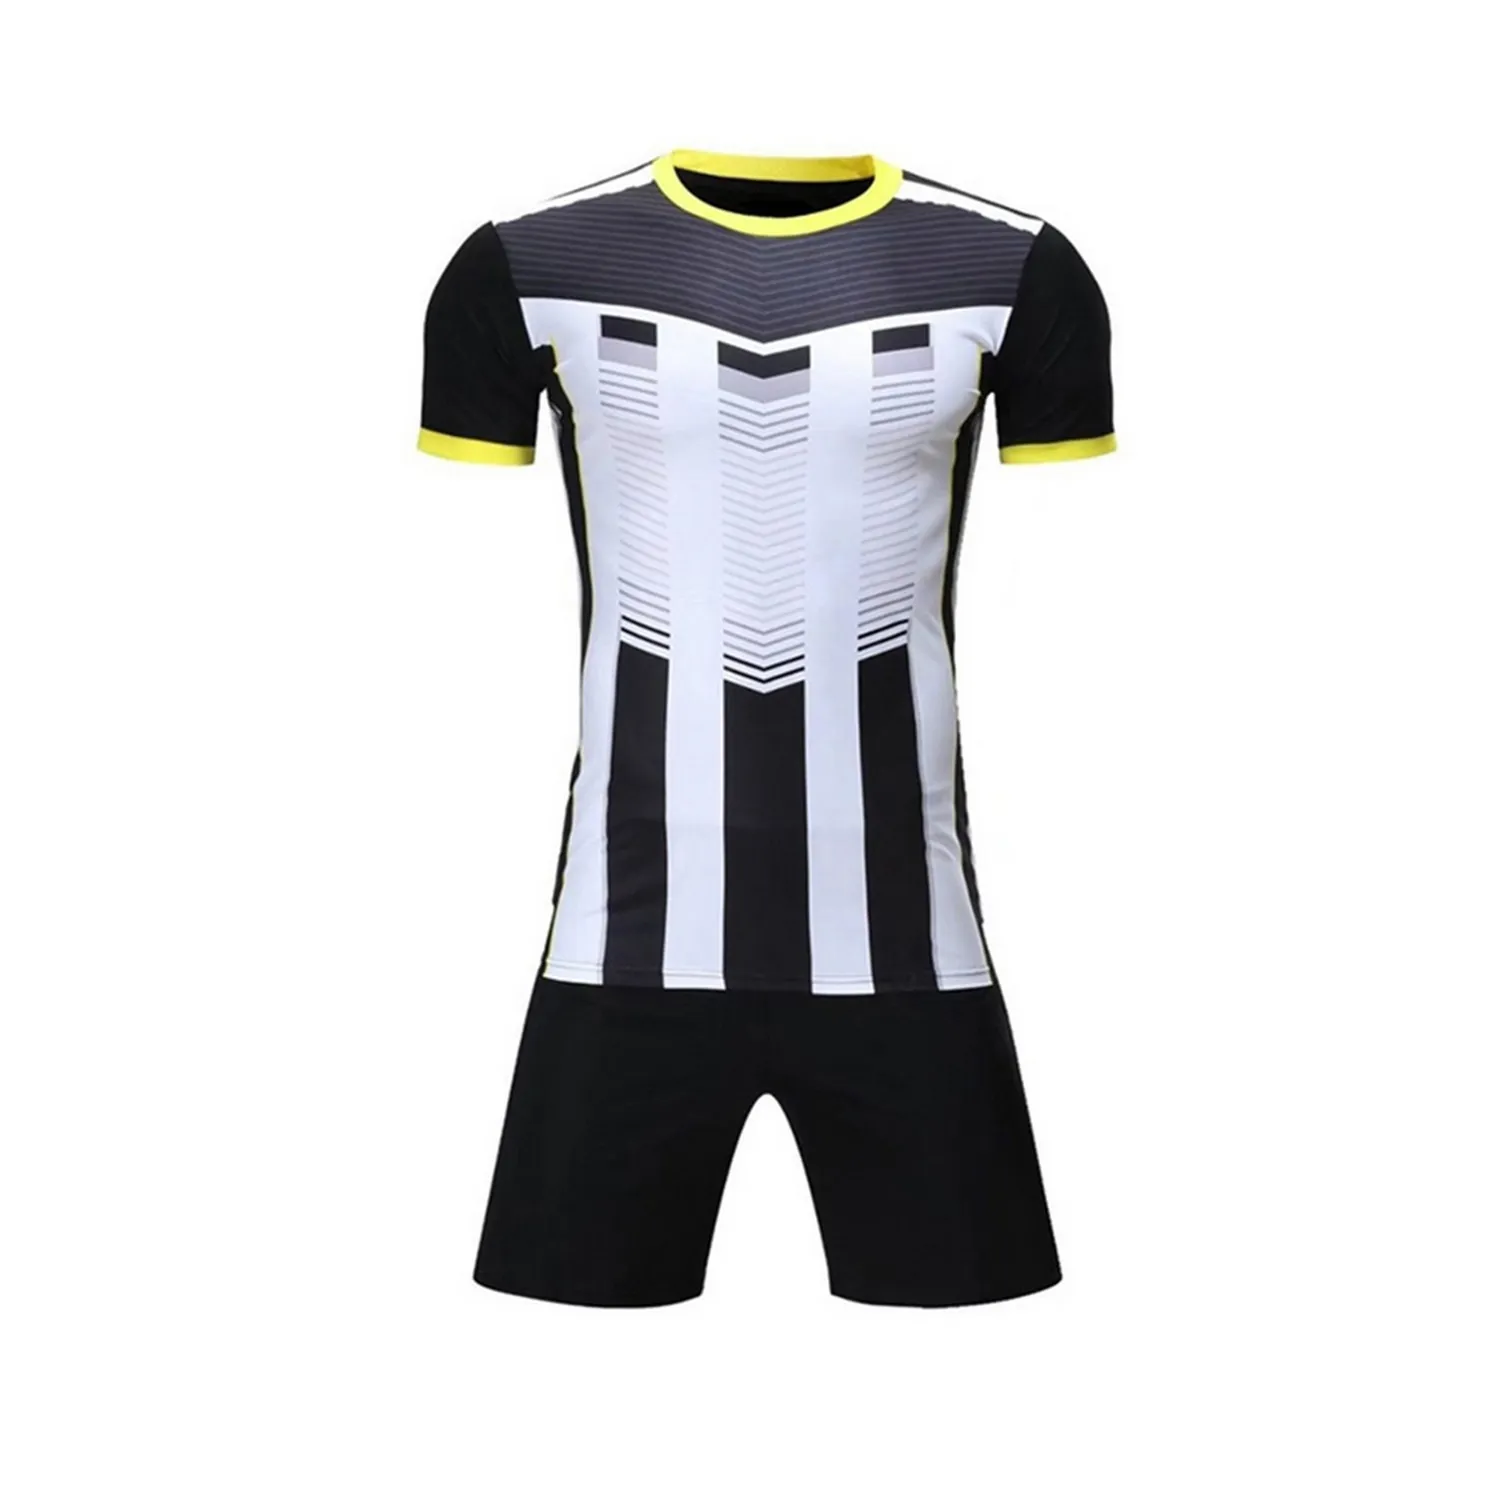 Pure Wholesale New Style Custom Australia Rugby Jersey Shirts Black White rugby cheap jerseys wholesale high quality solid rugby